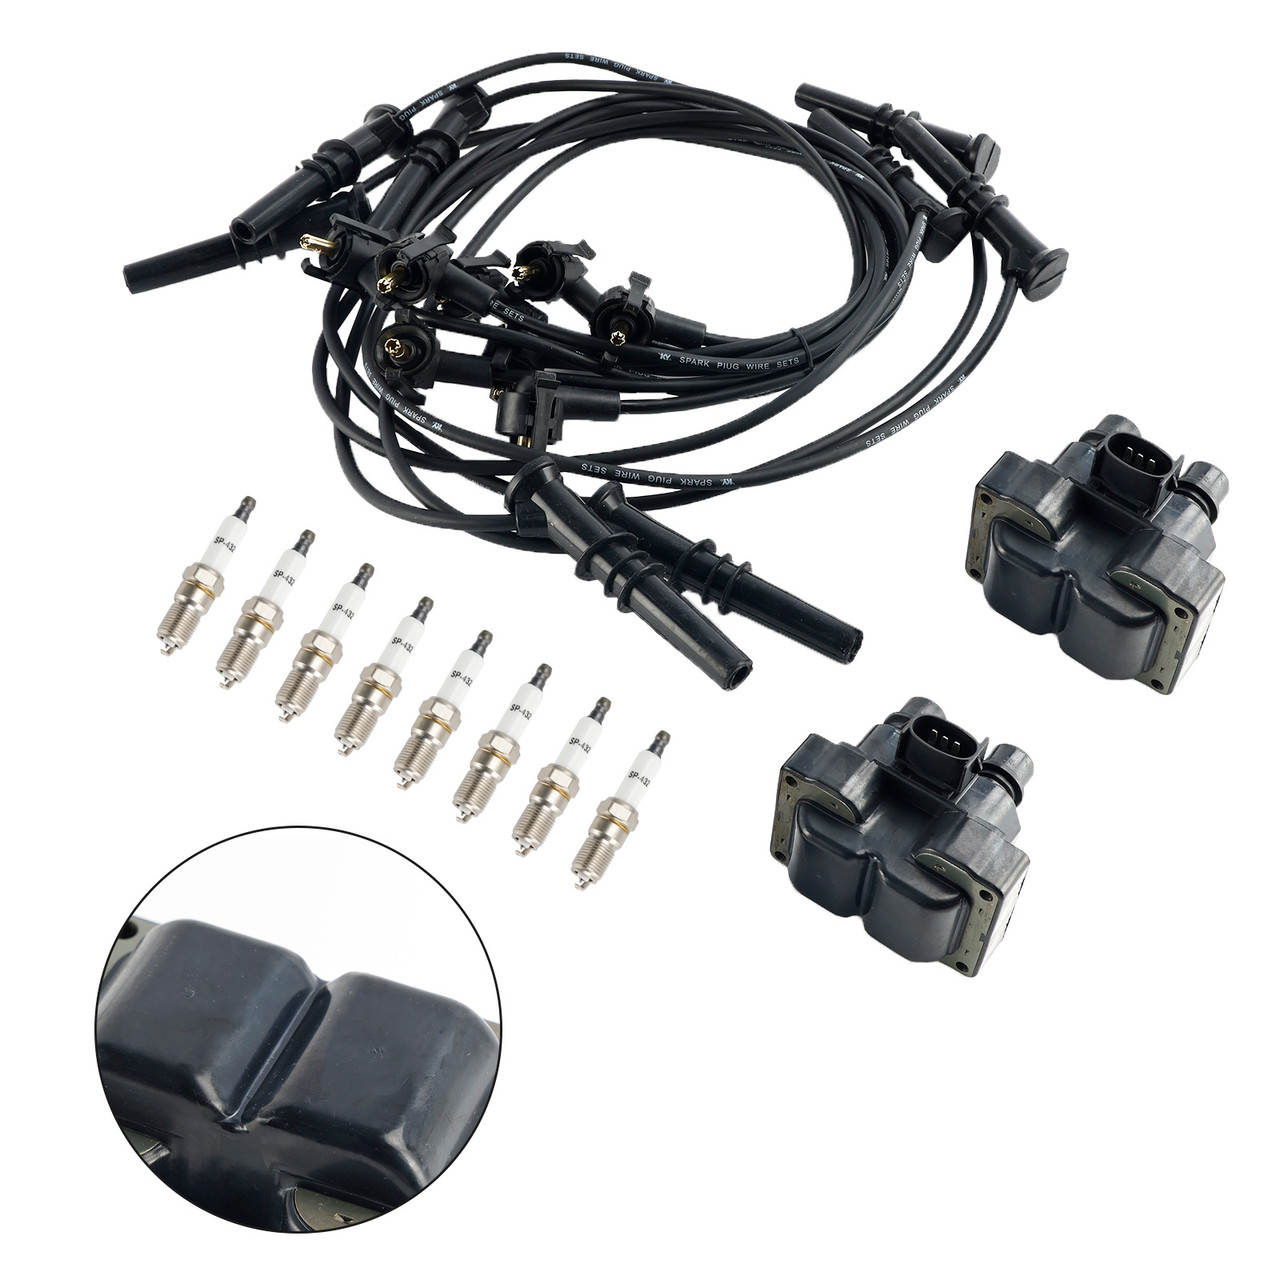 2 Ignition Coil Pack 8 Spark Plugs and Wire Set FD487 SP432 For Ford Expedition